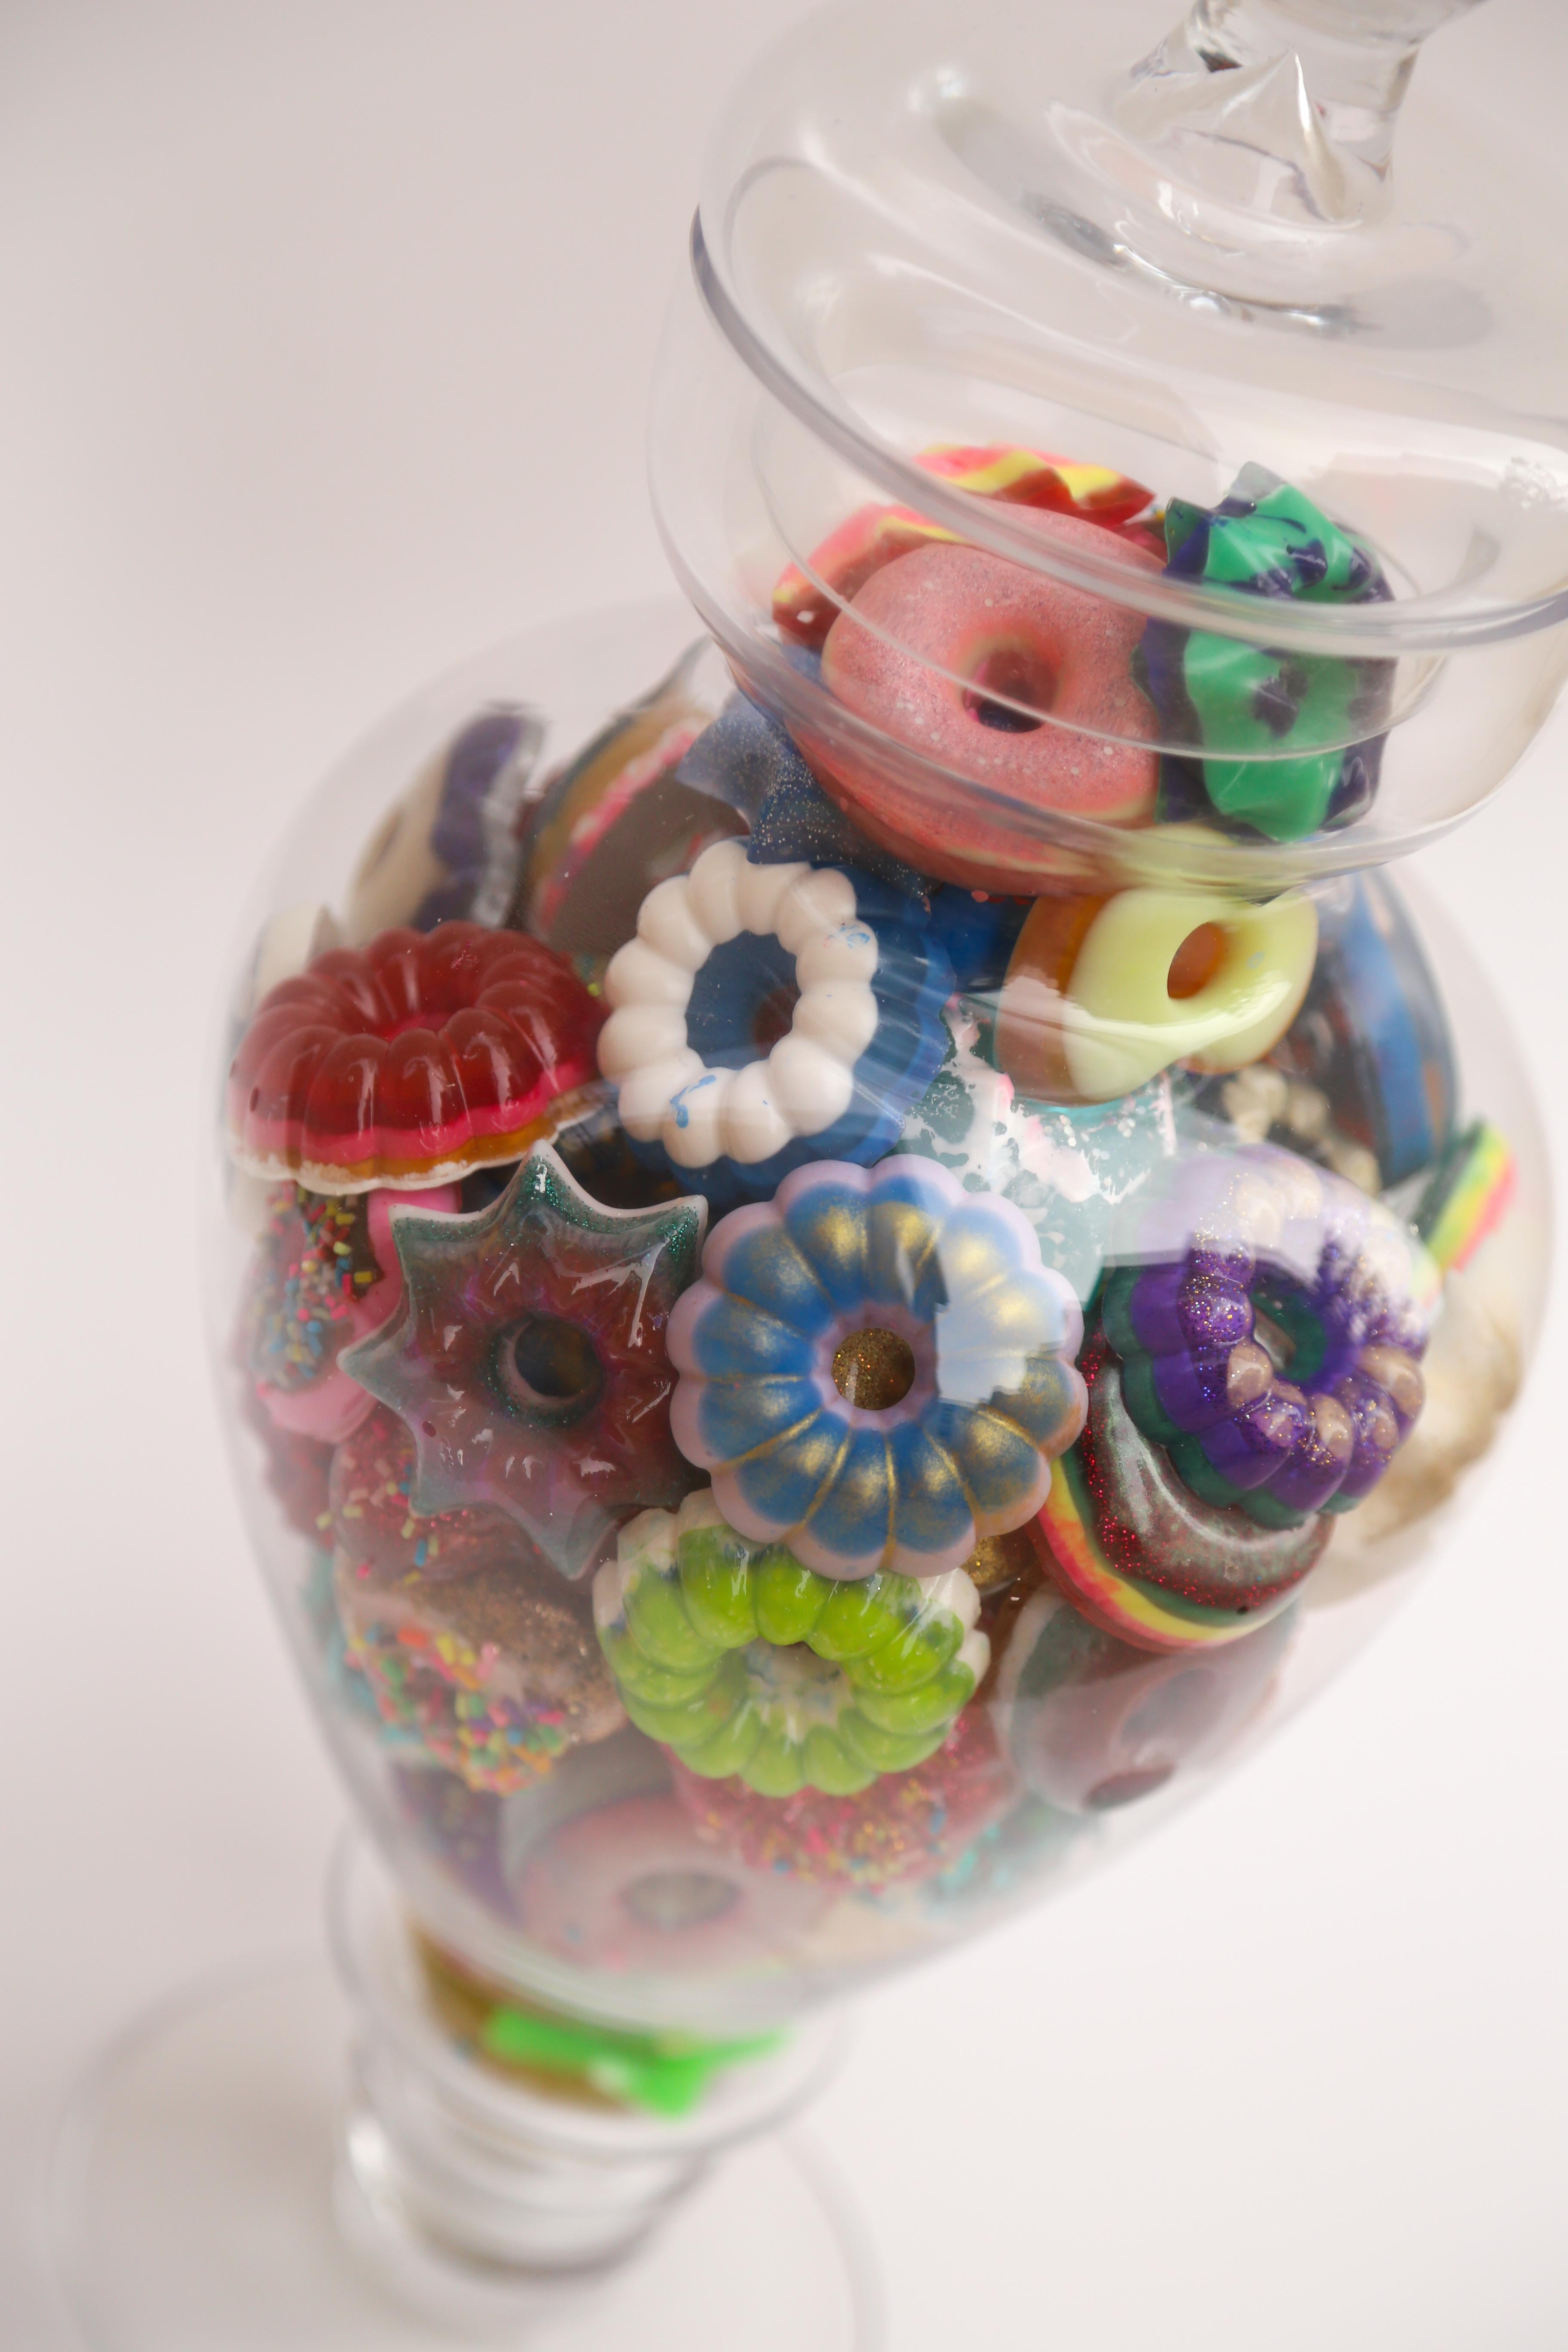 Donut Jar - Handmade Mini Resin Donuts in Glass Candy Jar / colorful  - Sculpture by Betsy Enzensberger